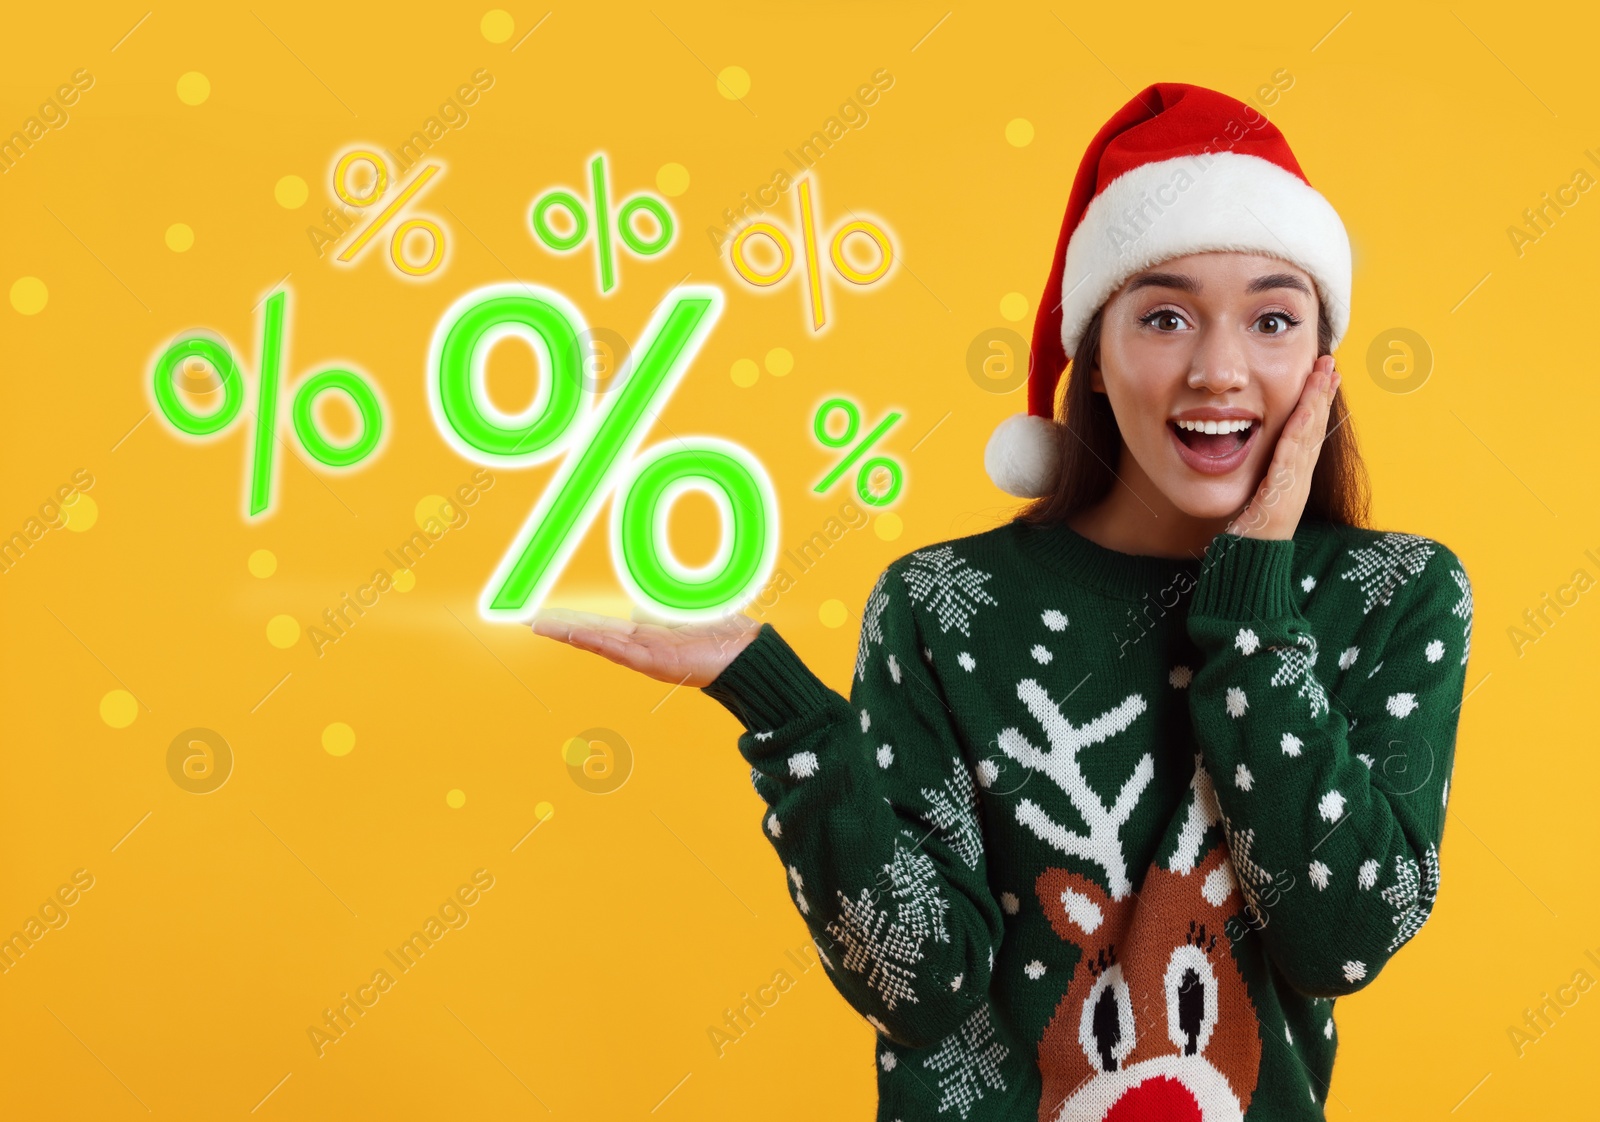 Image of Discount offer. Happy young woman in Christmas sweater and Santa hat showing percent signs on orange background